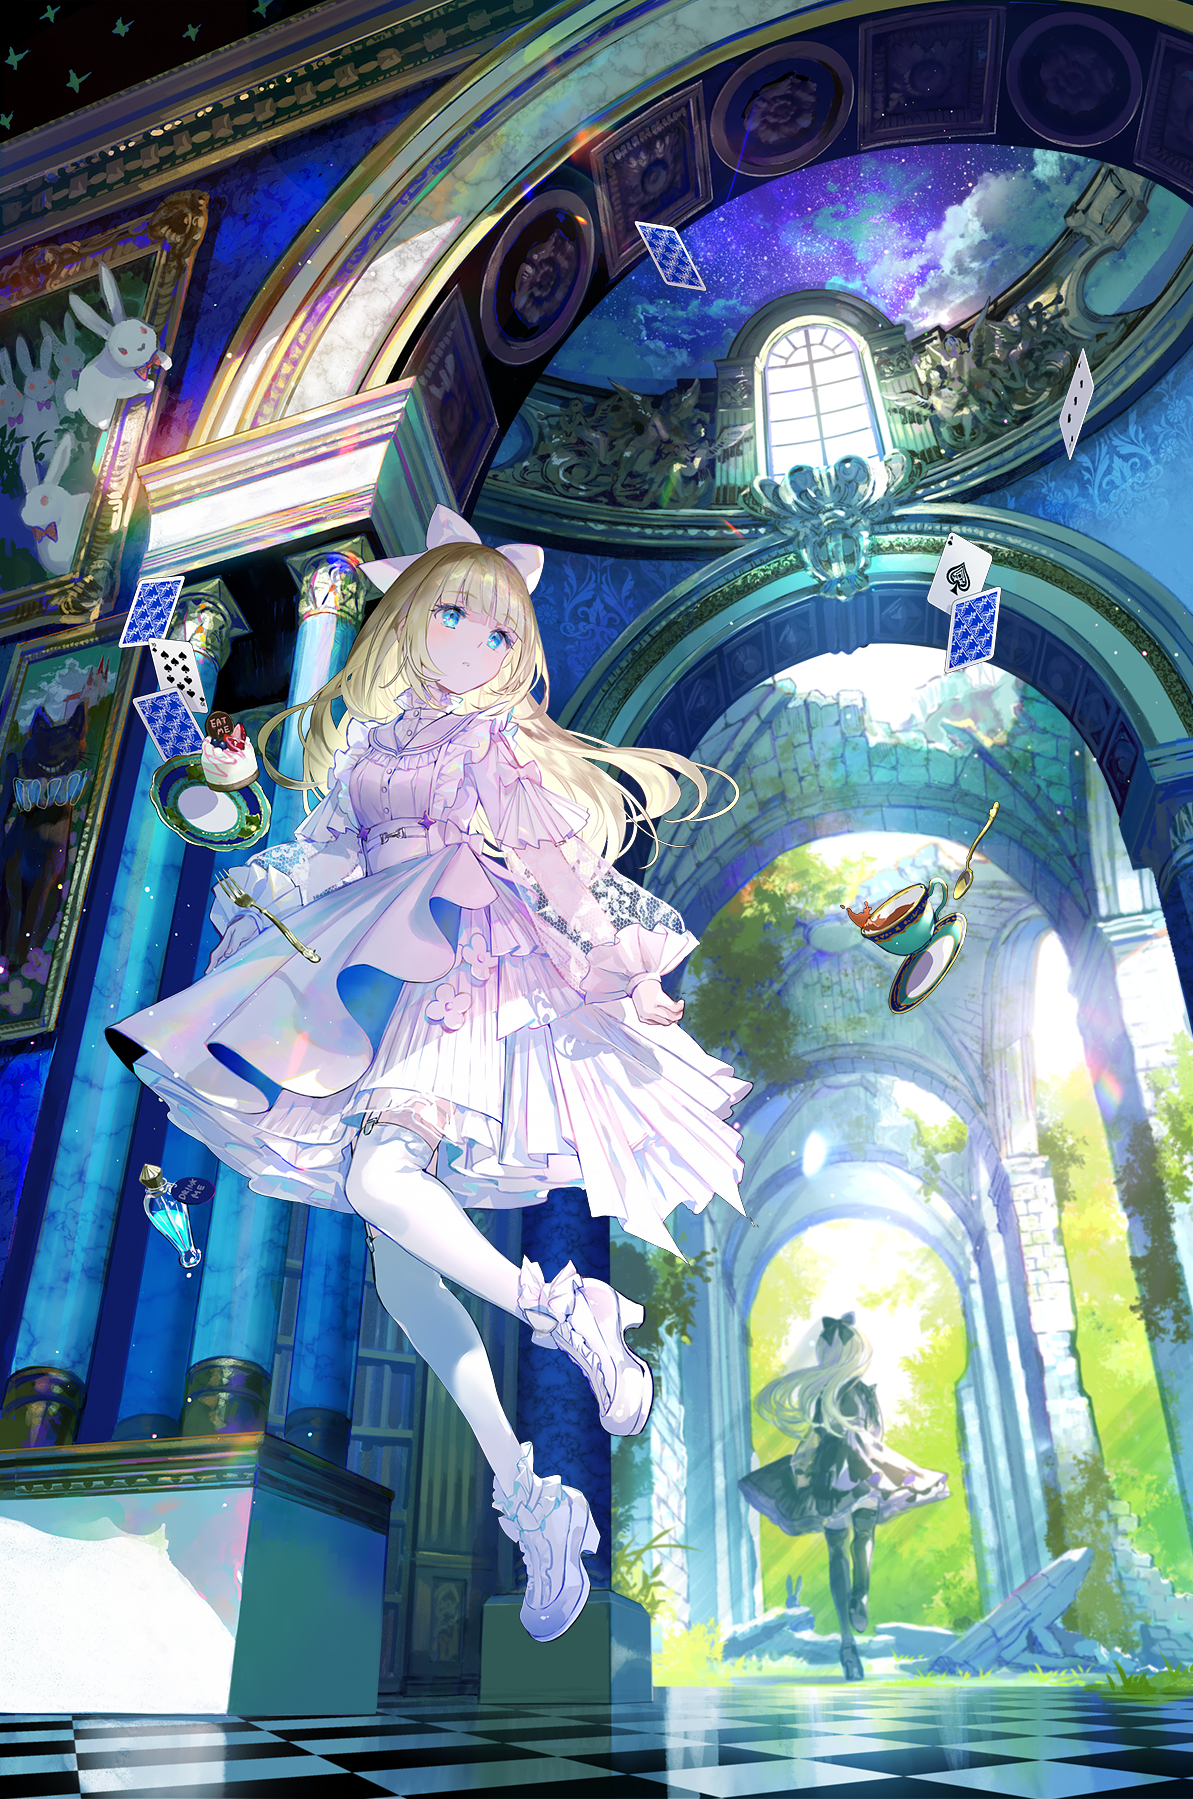 Anime 1193x1799 anime anime girls cards portrait display looking away dress blonde blue eyes plates fork cake tea spoon heels walking checkered rabbits picture frames painting drink sunlight Alice in Wonderland